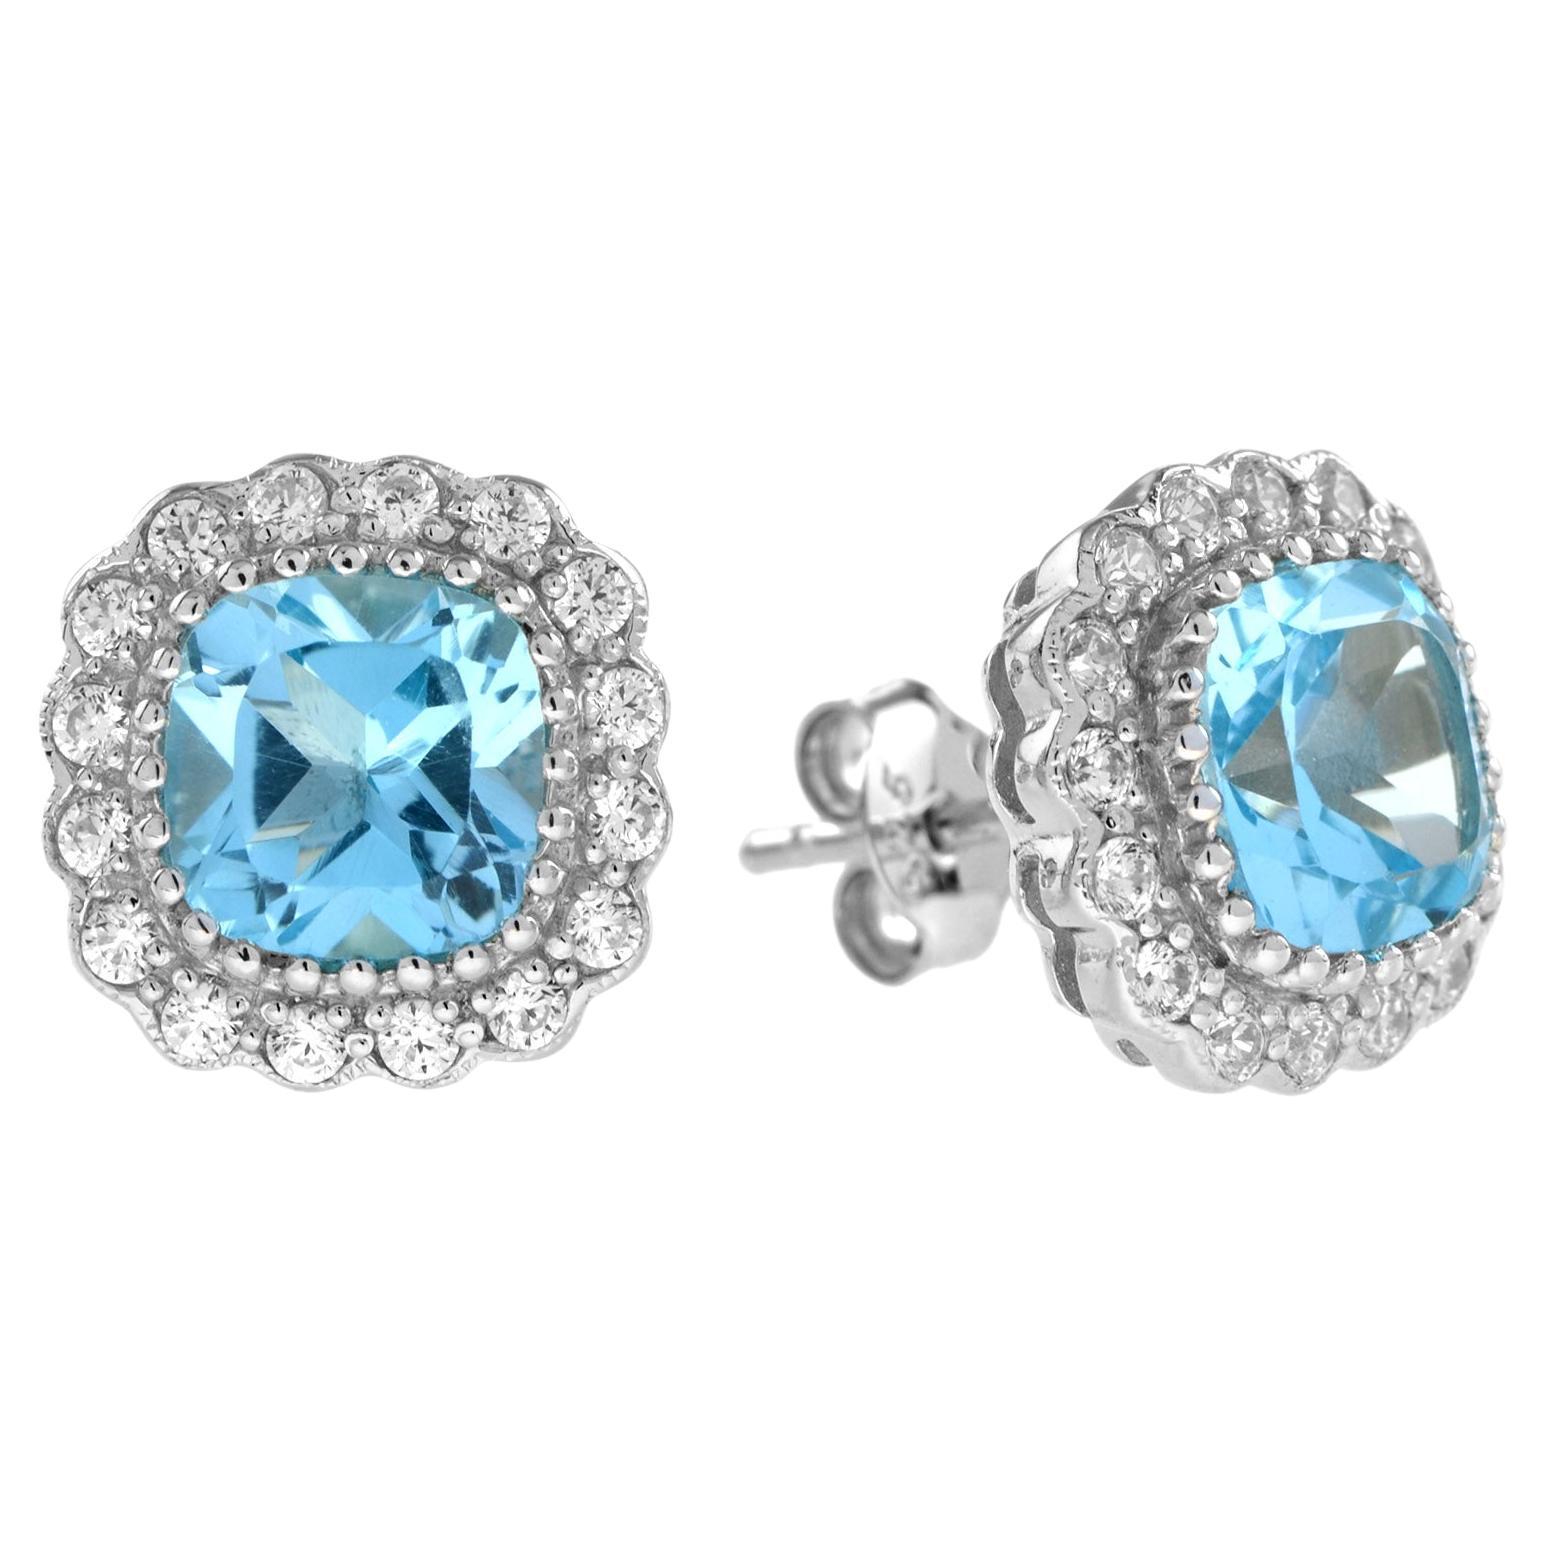 Cushion Blue Topaz and Diamond Halo Stud Earrings in 14K White Gold